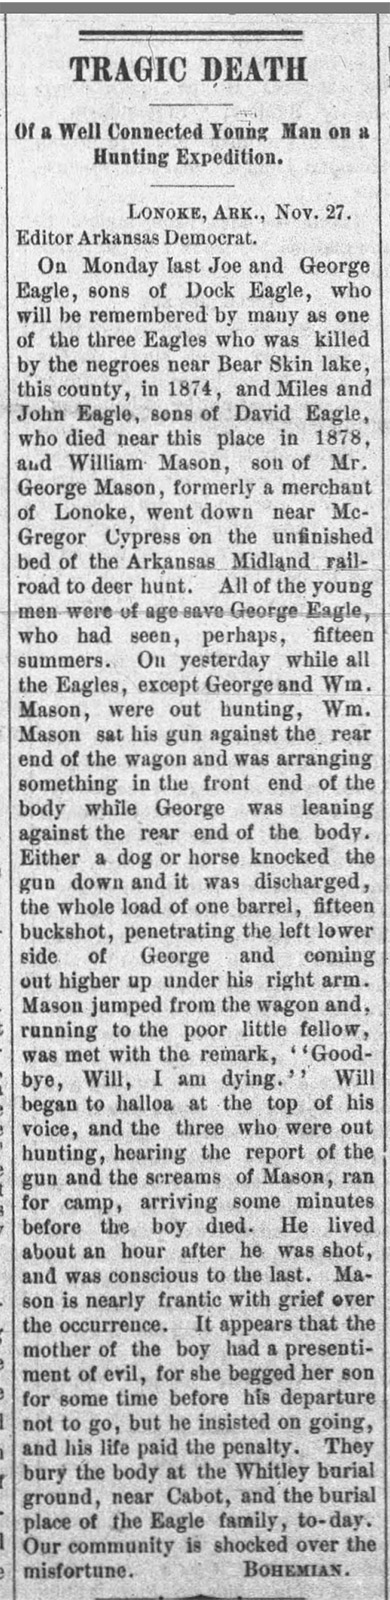 "Tragic death of a well connected young man on a Hunting Expedition" newspaper clipping